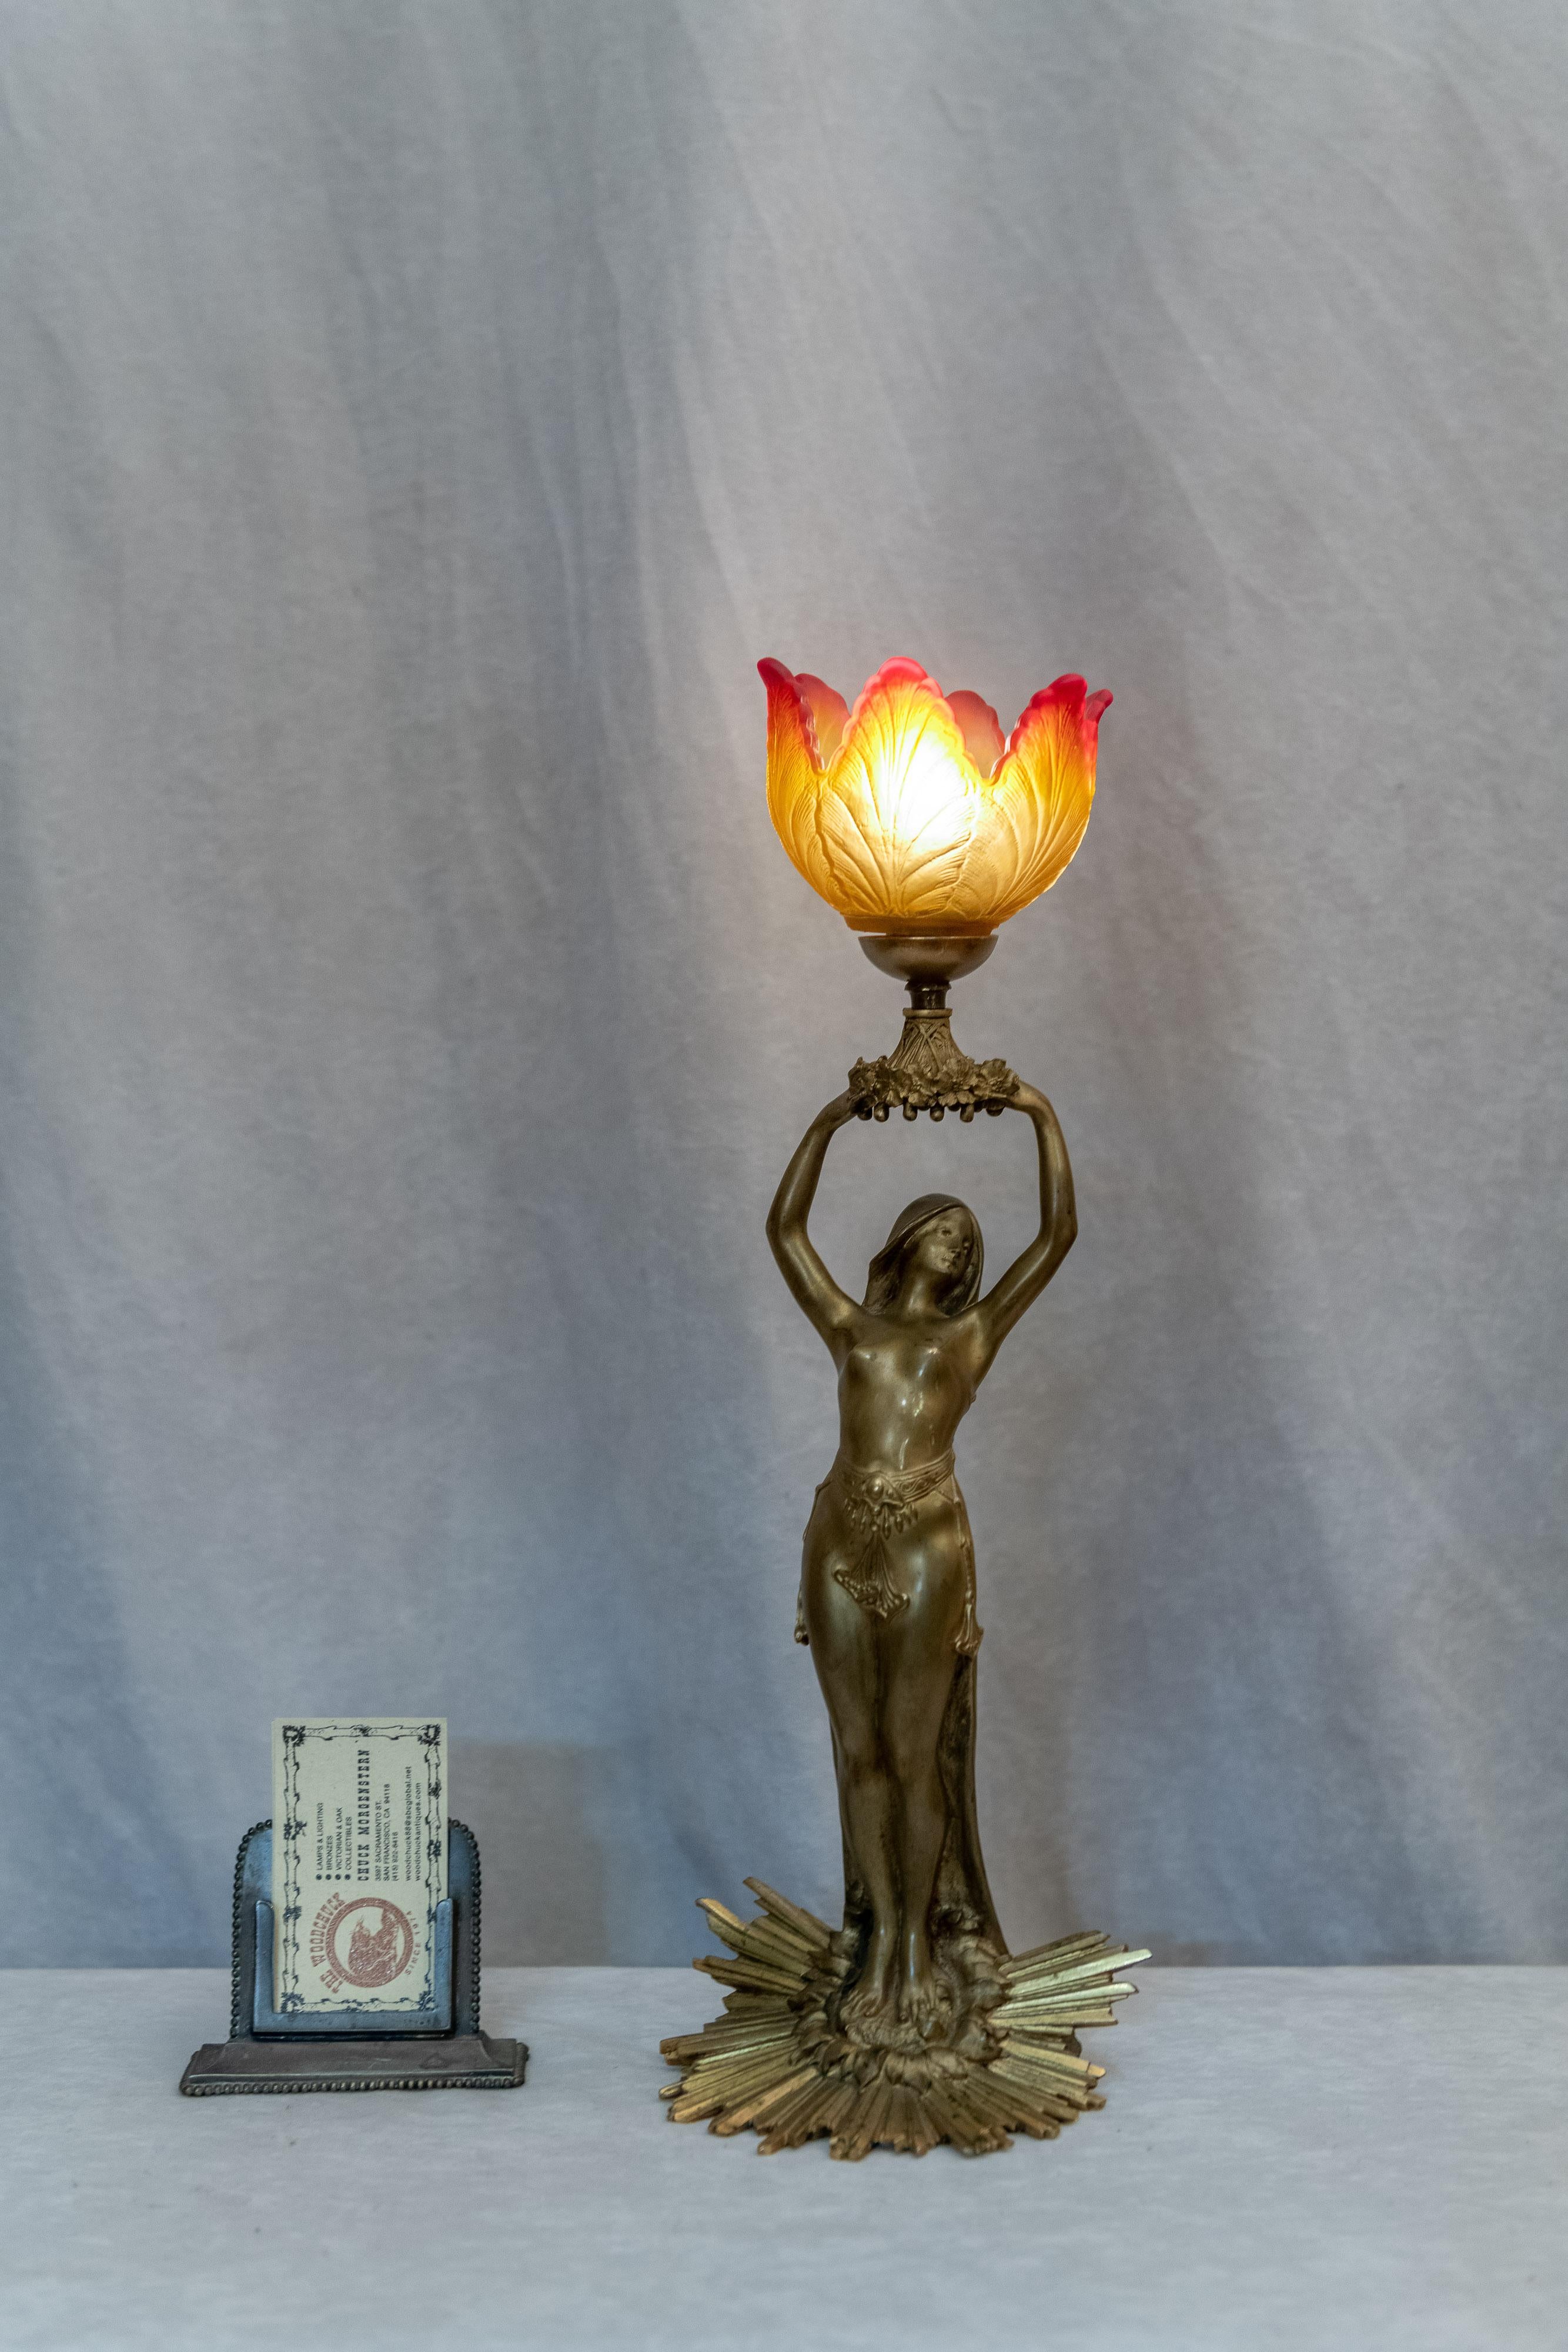 We try to buy the best of our favorite style, Art Nouveau. This figural lamp is a real little gem. Artist-signed A. Fery and we believe it was done circa 1900. The base on which this lovely gal stands is the epitome of the beauty of Art Nouveau.